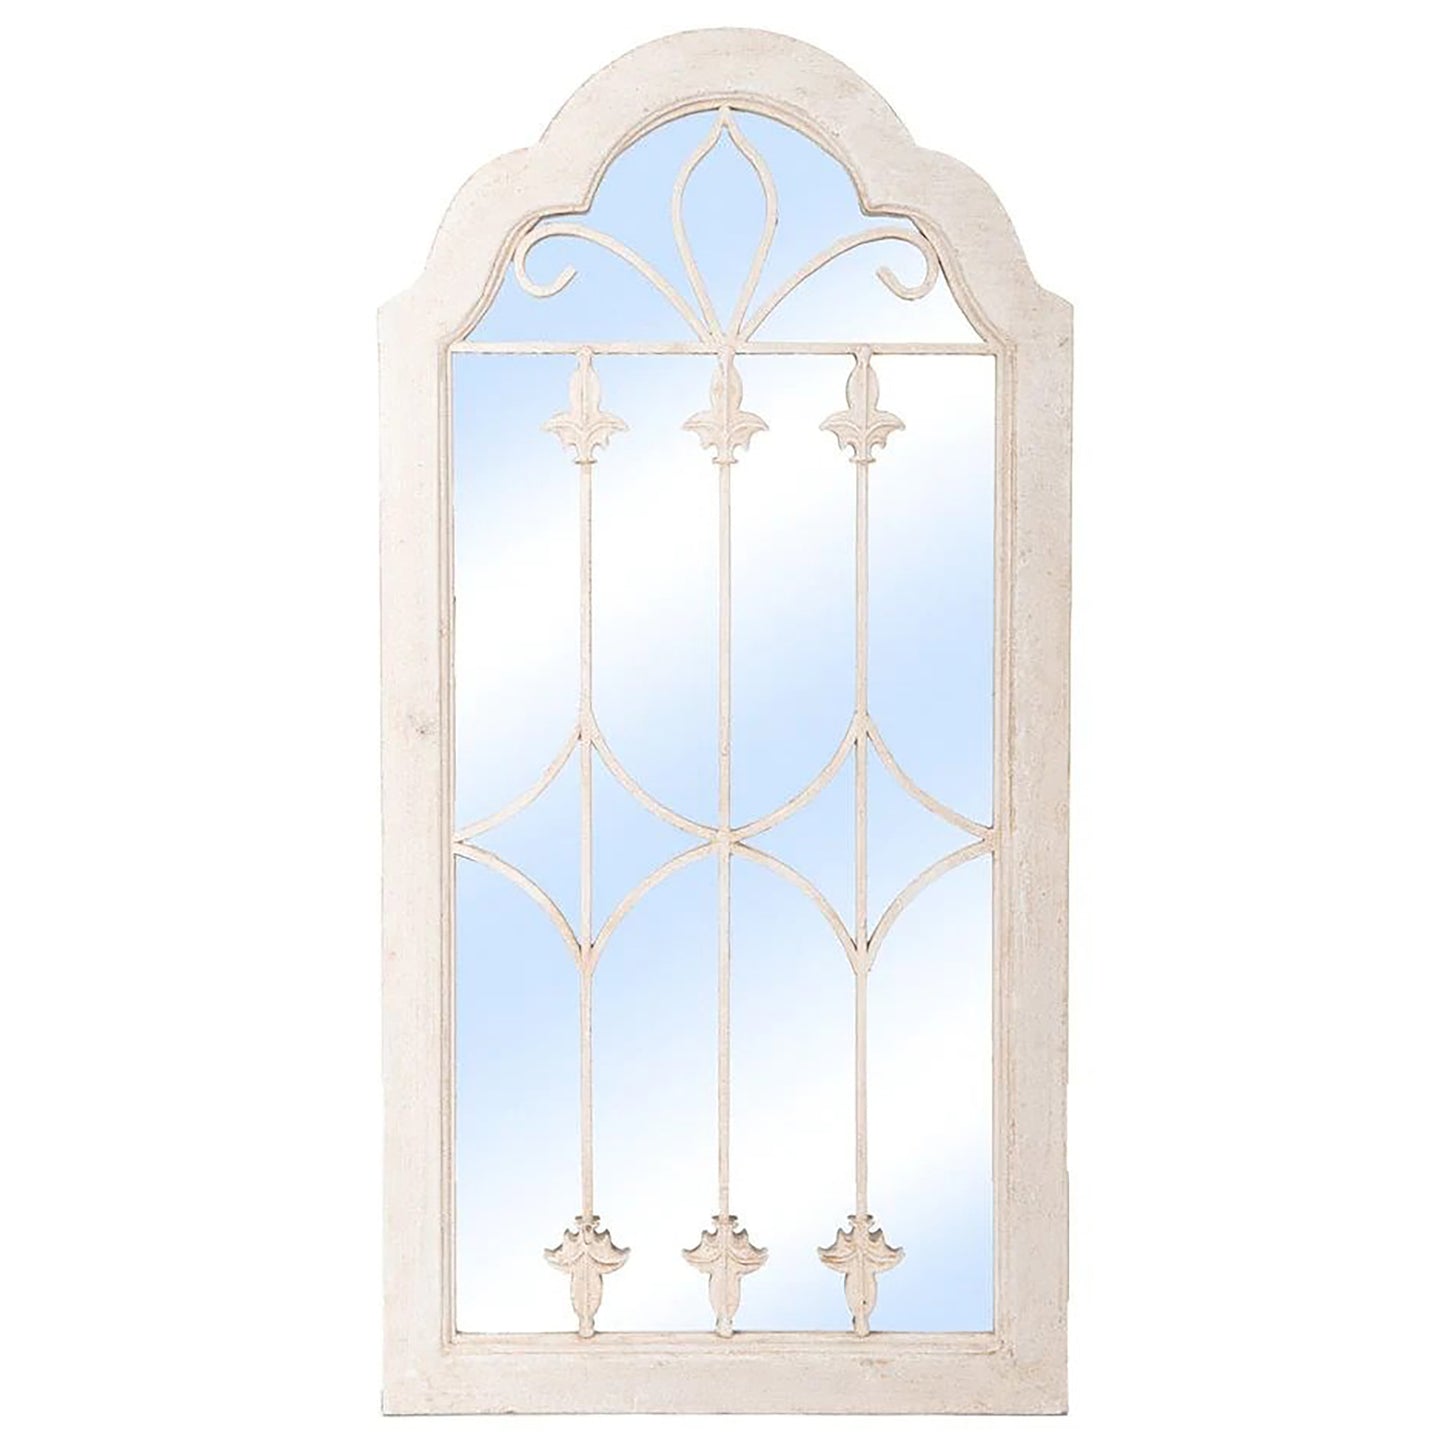 Large Arched Garden Wall Mirror - Lyon white